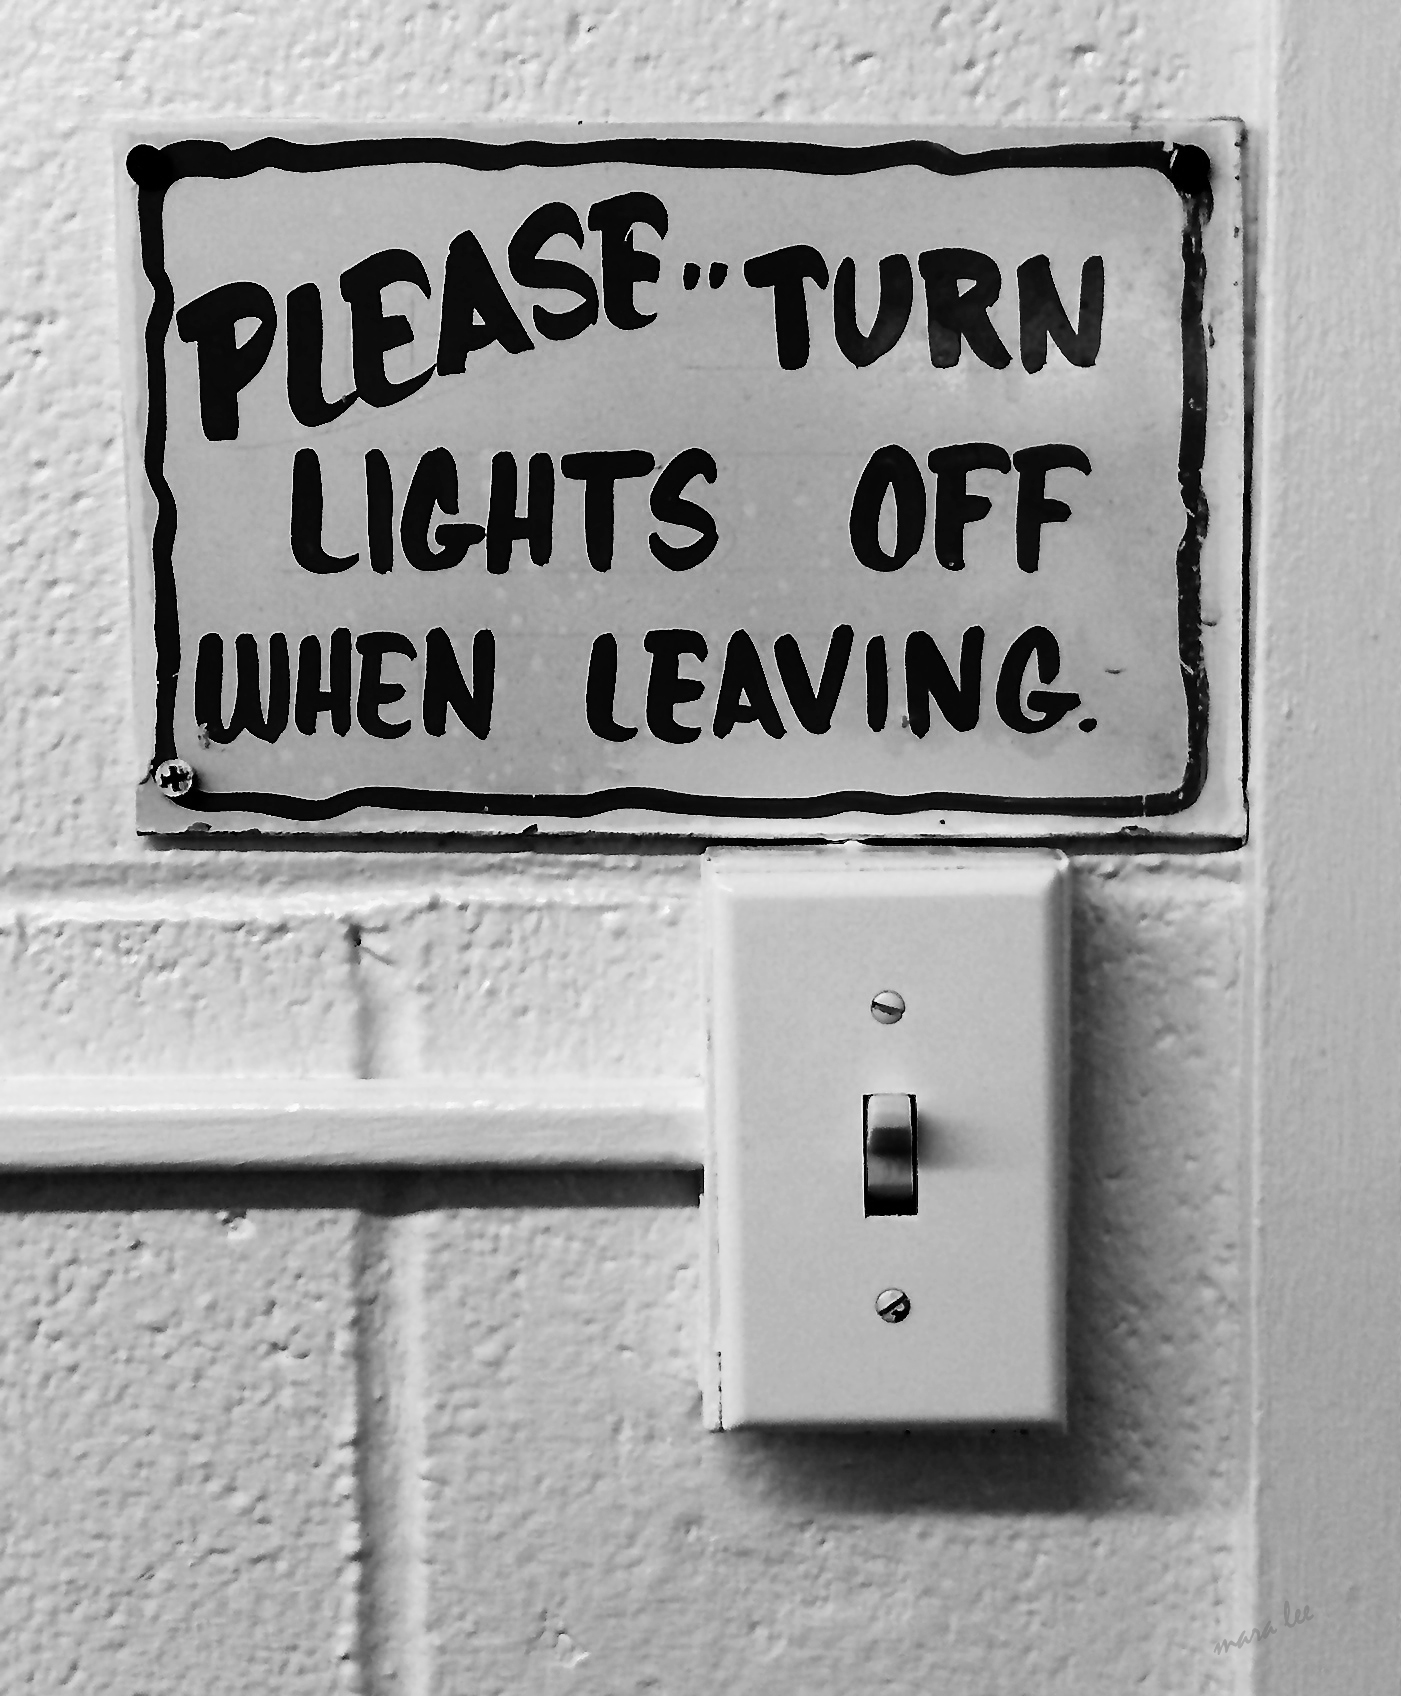 turn off the lights.